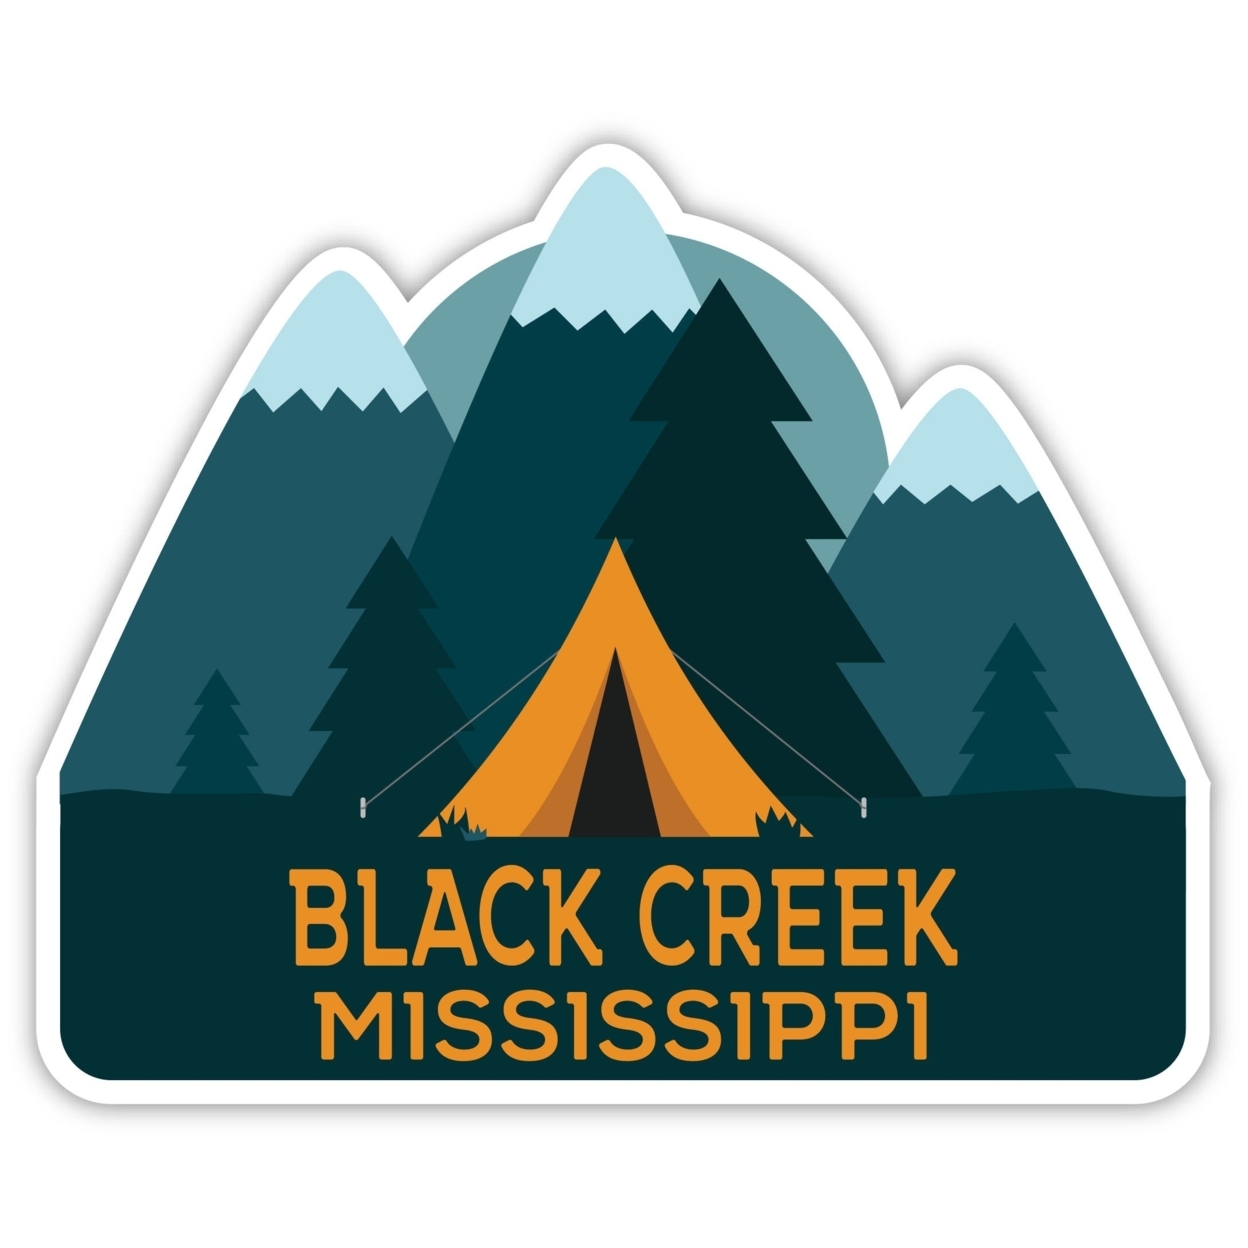 Black Creek Mississippi Souvenir Decorative Stickers (Choose Theme And Size) - 4-Pack, 6-Inch, Tent